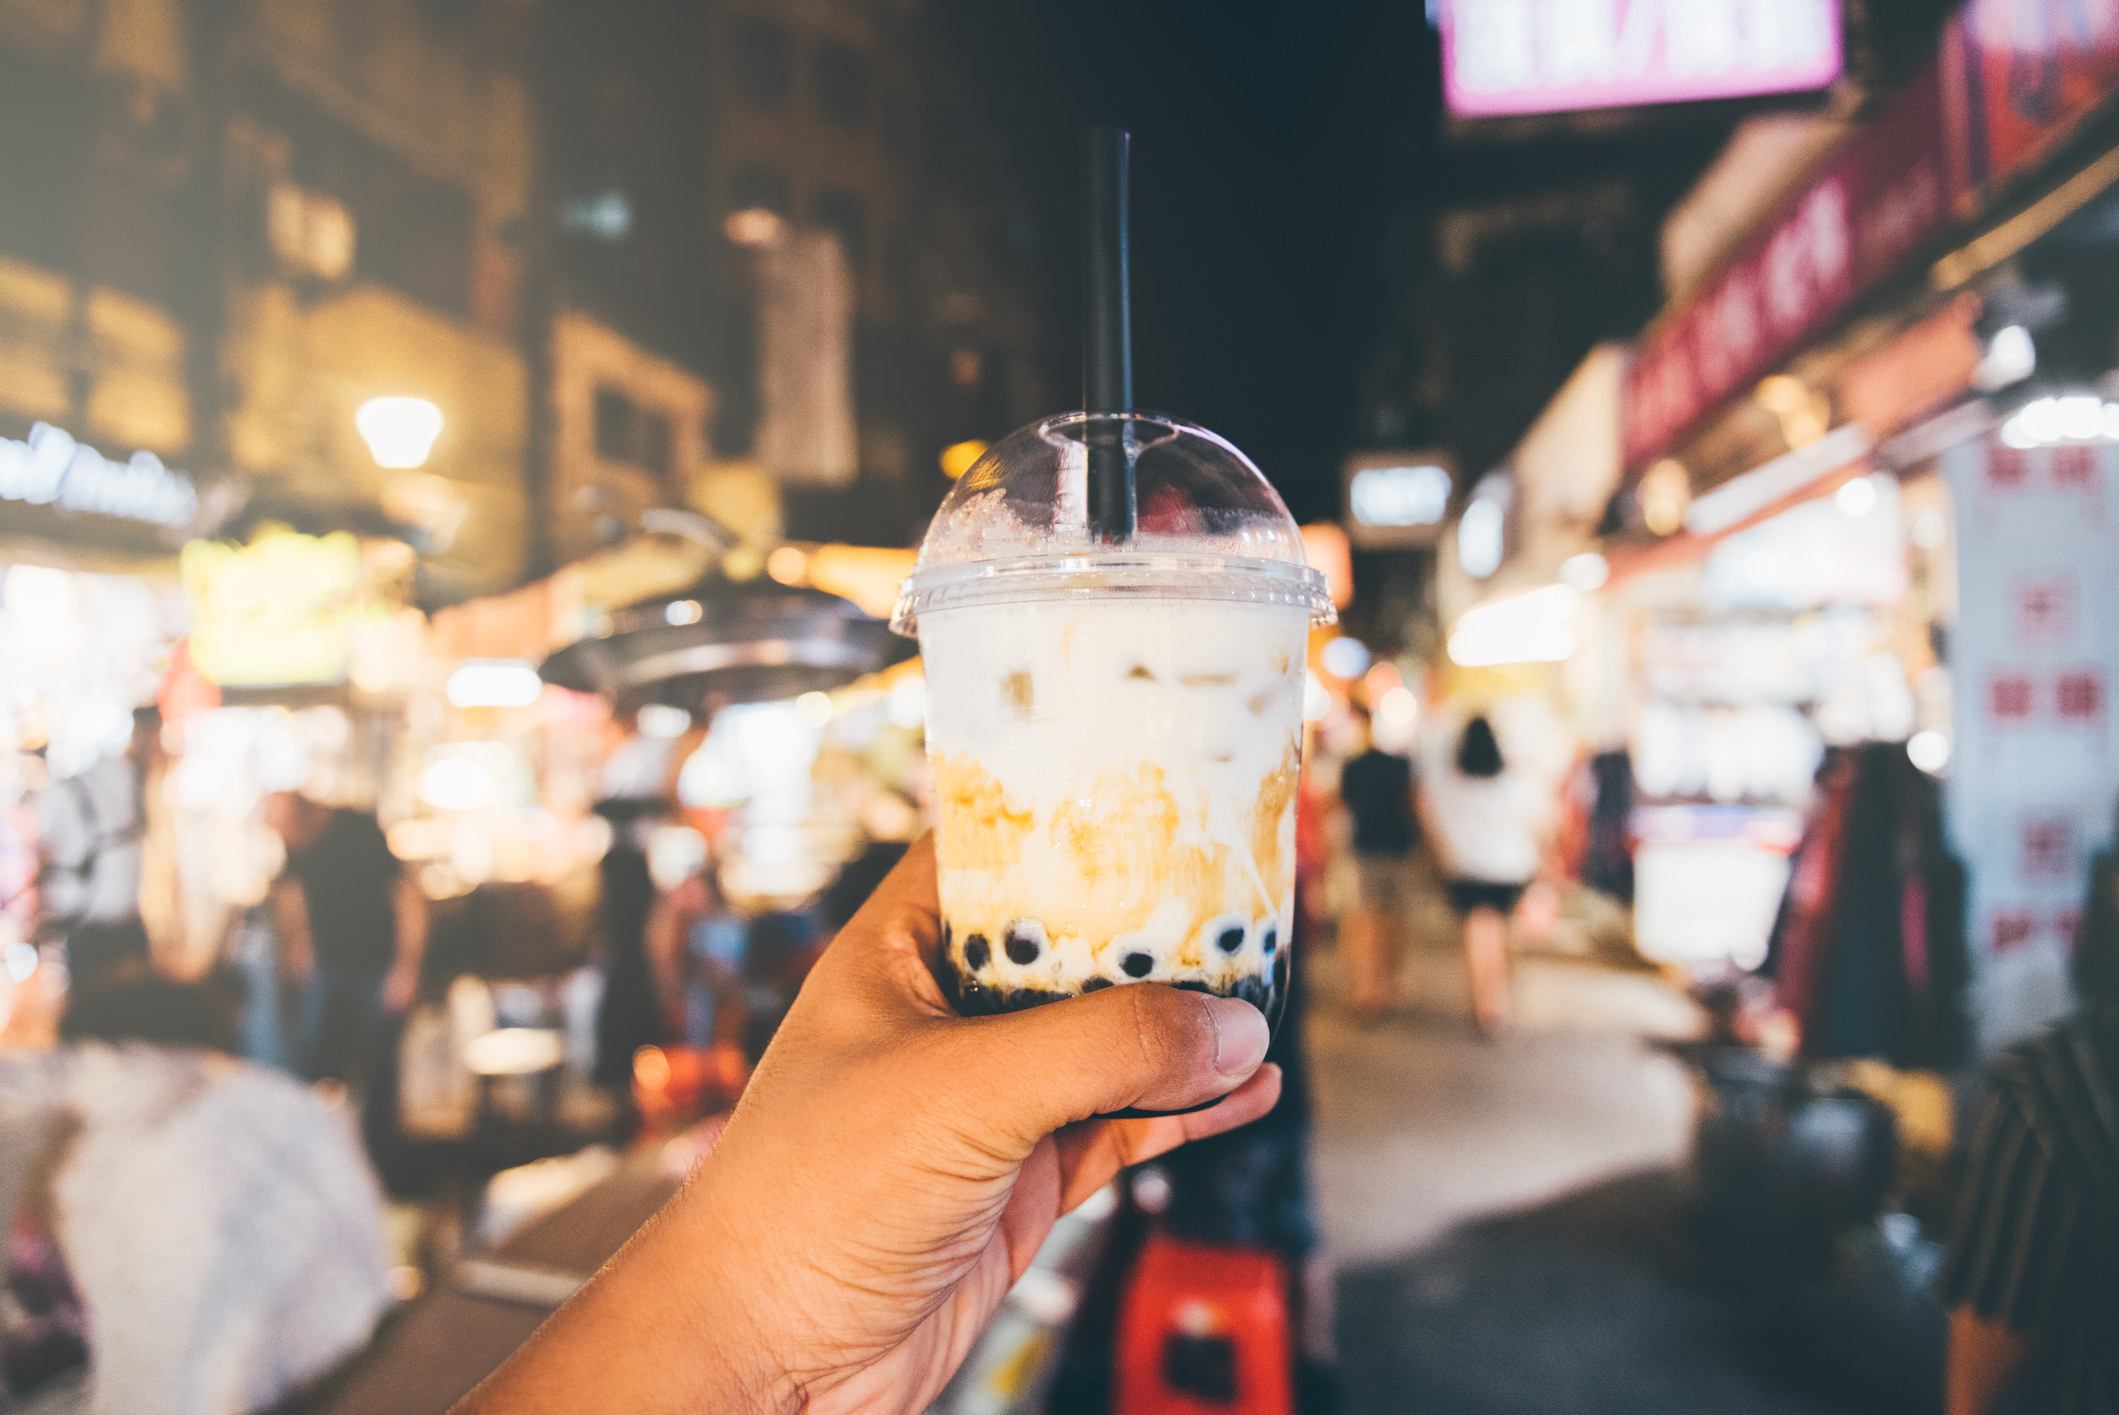 A hand holding boba tea in a night market